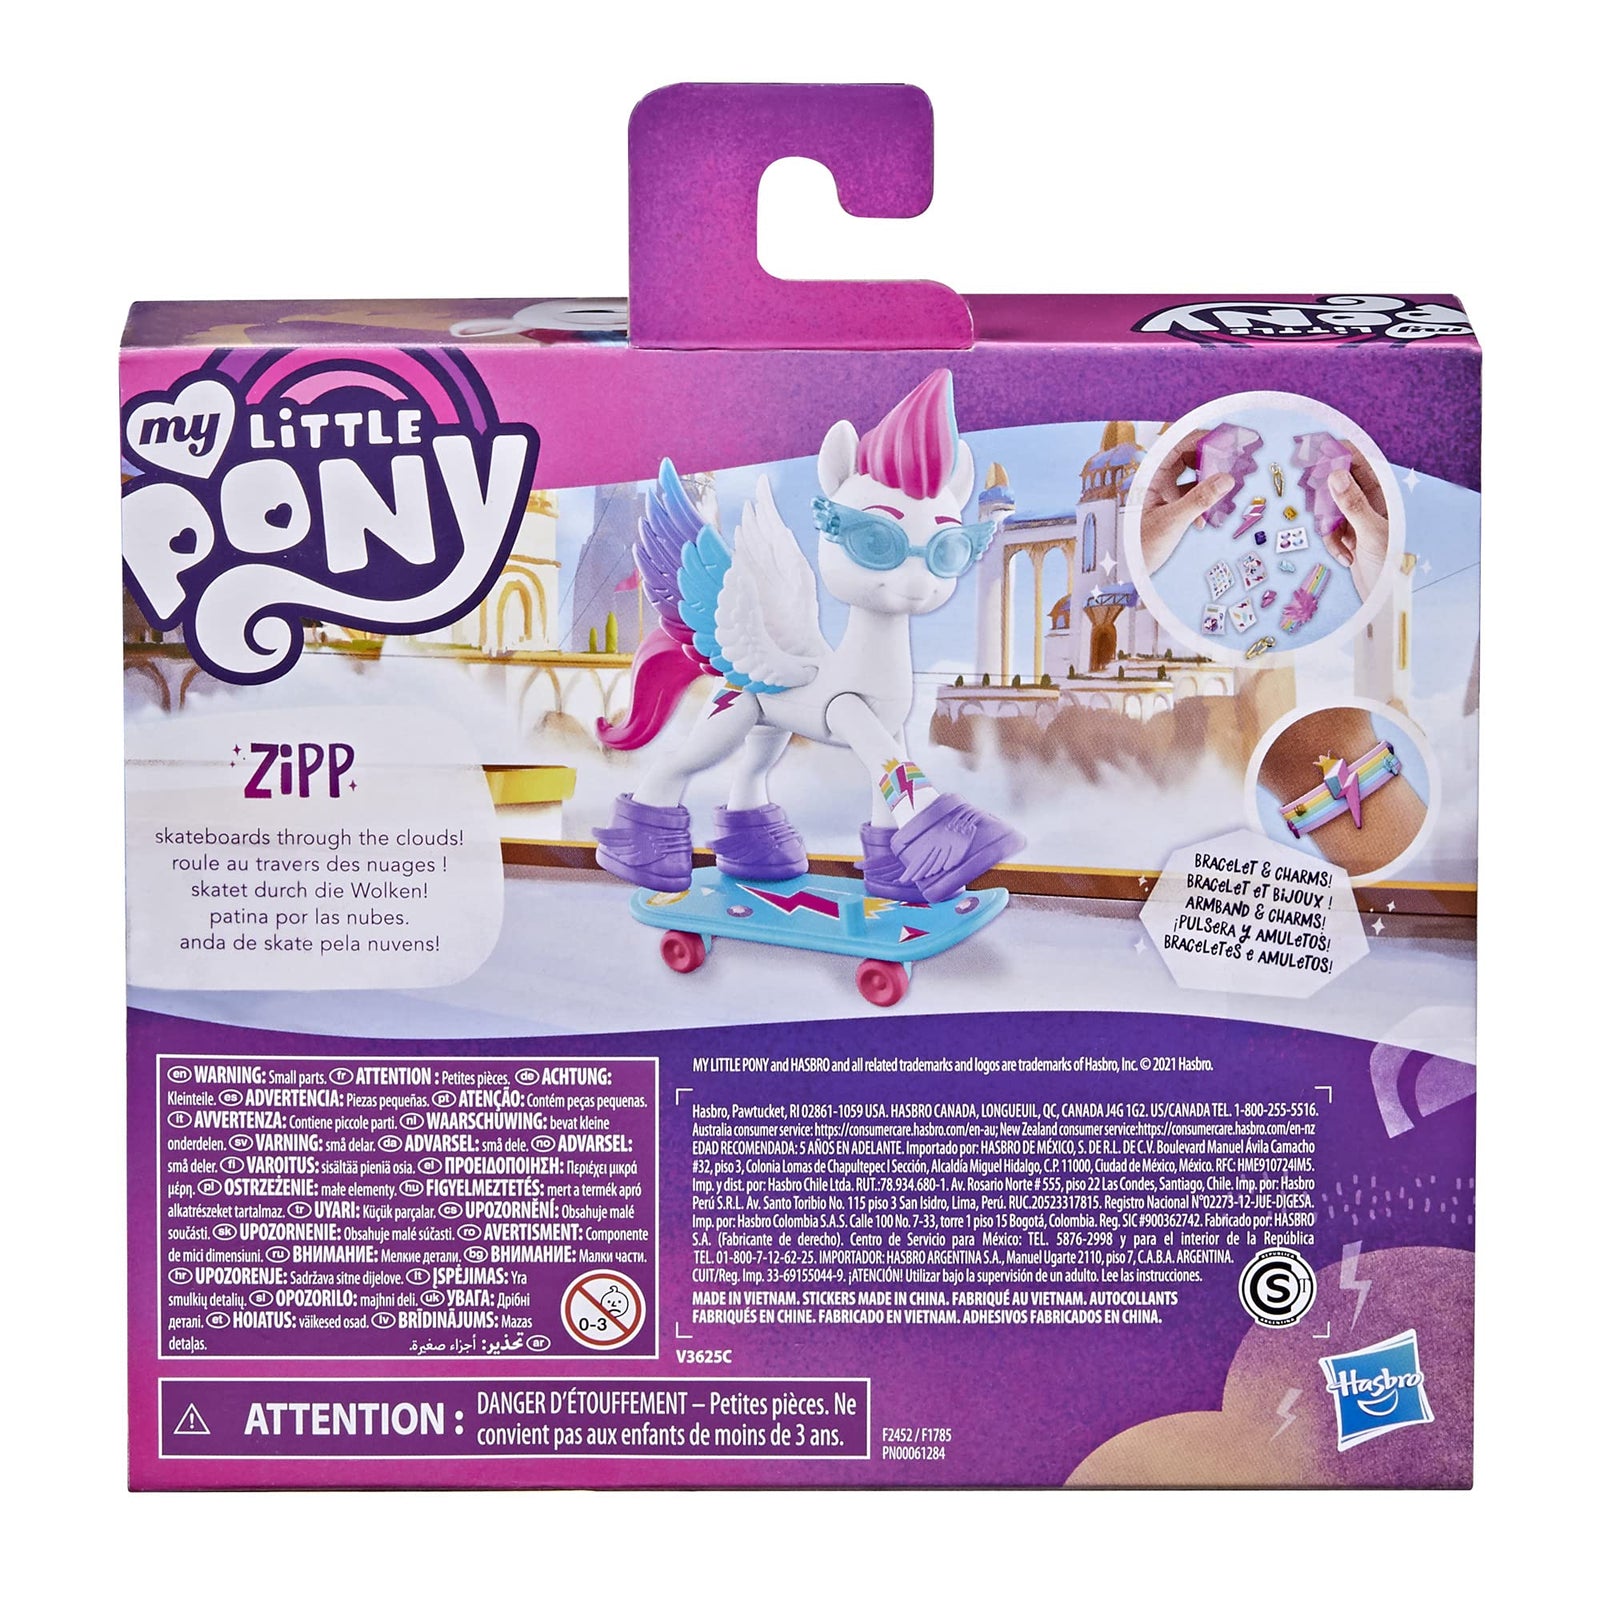 My Little Pony: A New Generation Movie Crystal Adventure Zipp Storm - 3-Inch White Pony Toy with Surprise Accessories, Friendship Bracelet